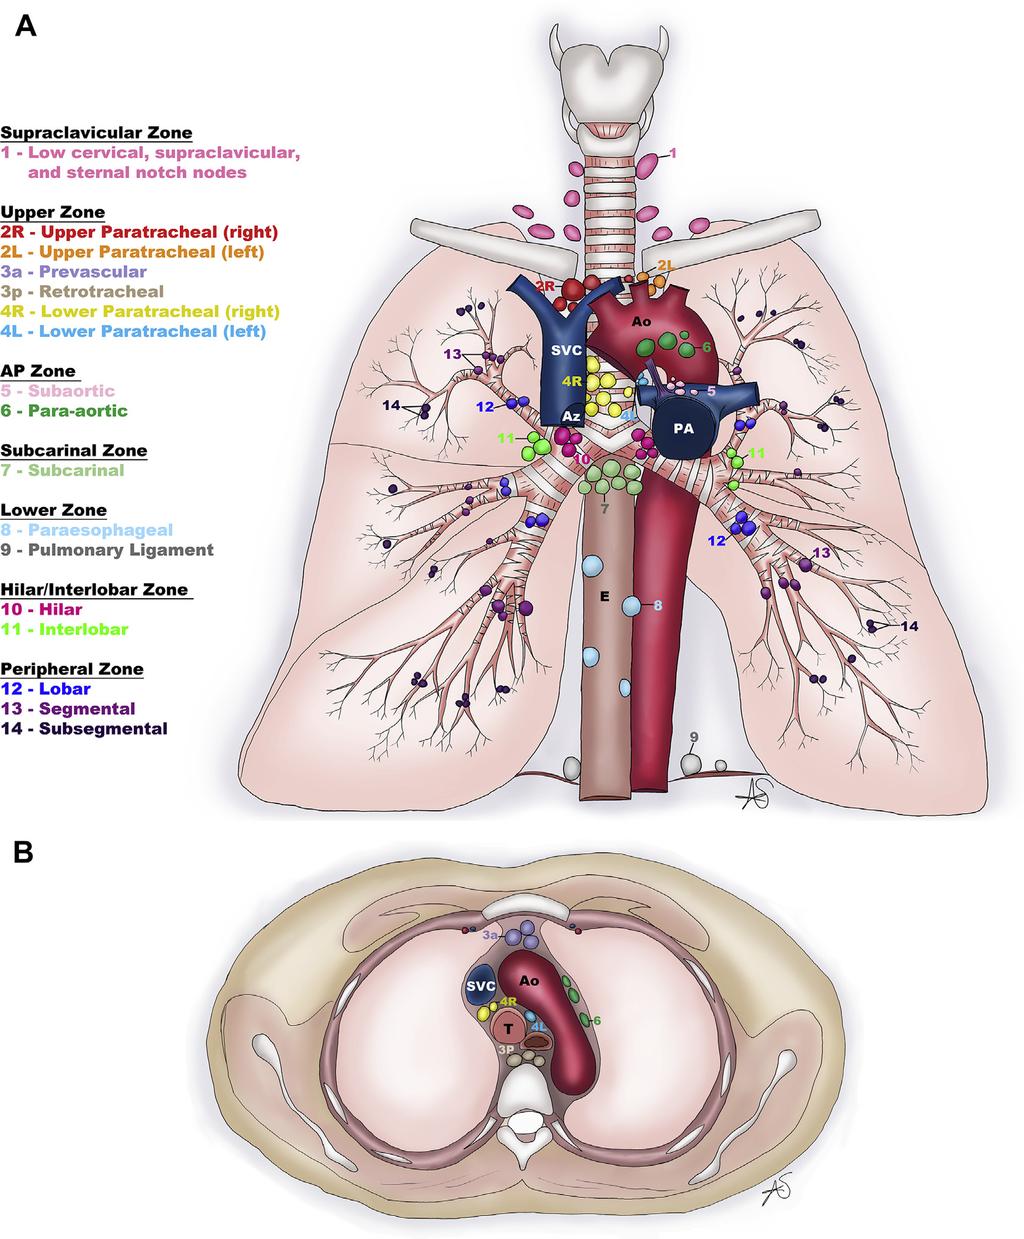 358 Jawad et al Fig. 2. (A) Coronal and (B) cross-sectional diagrams of the IASLC lymph node map.